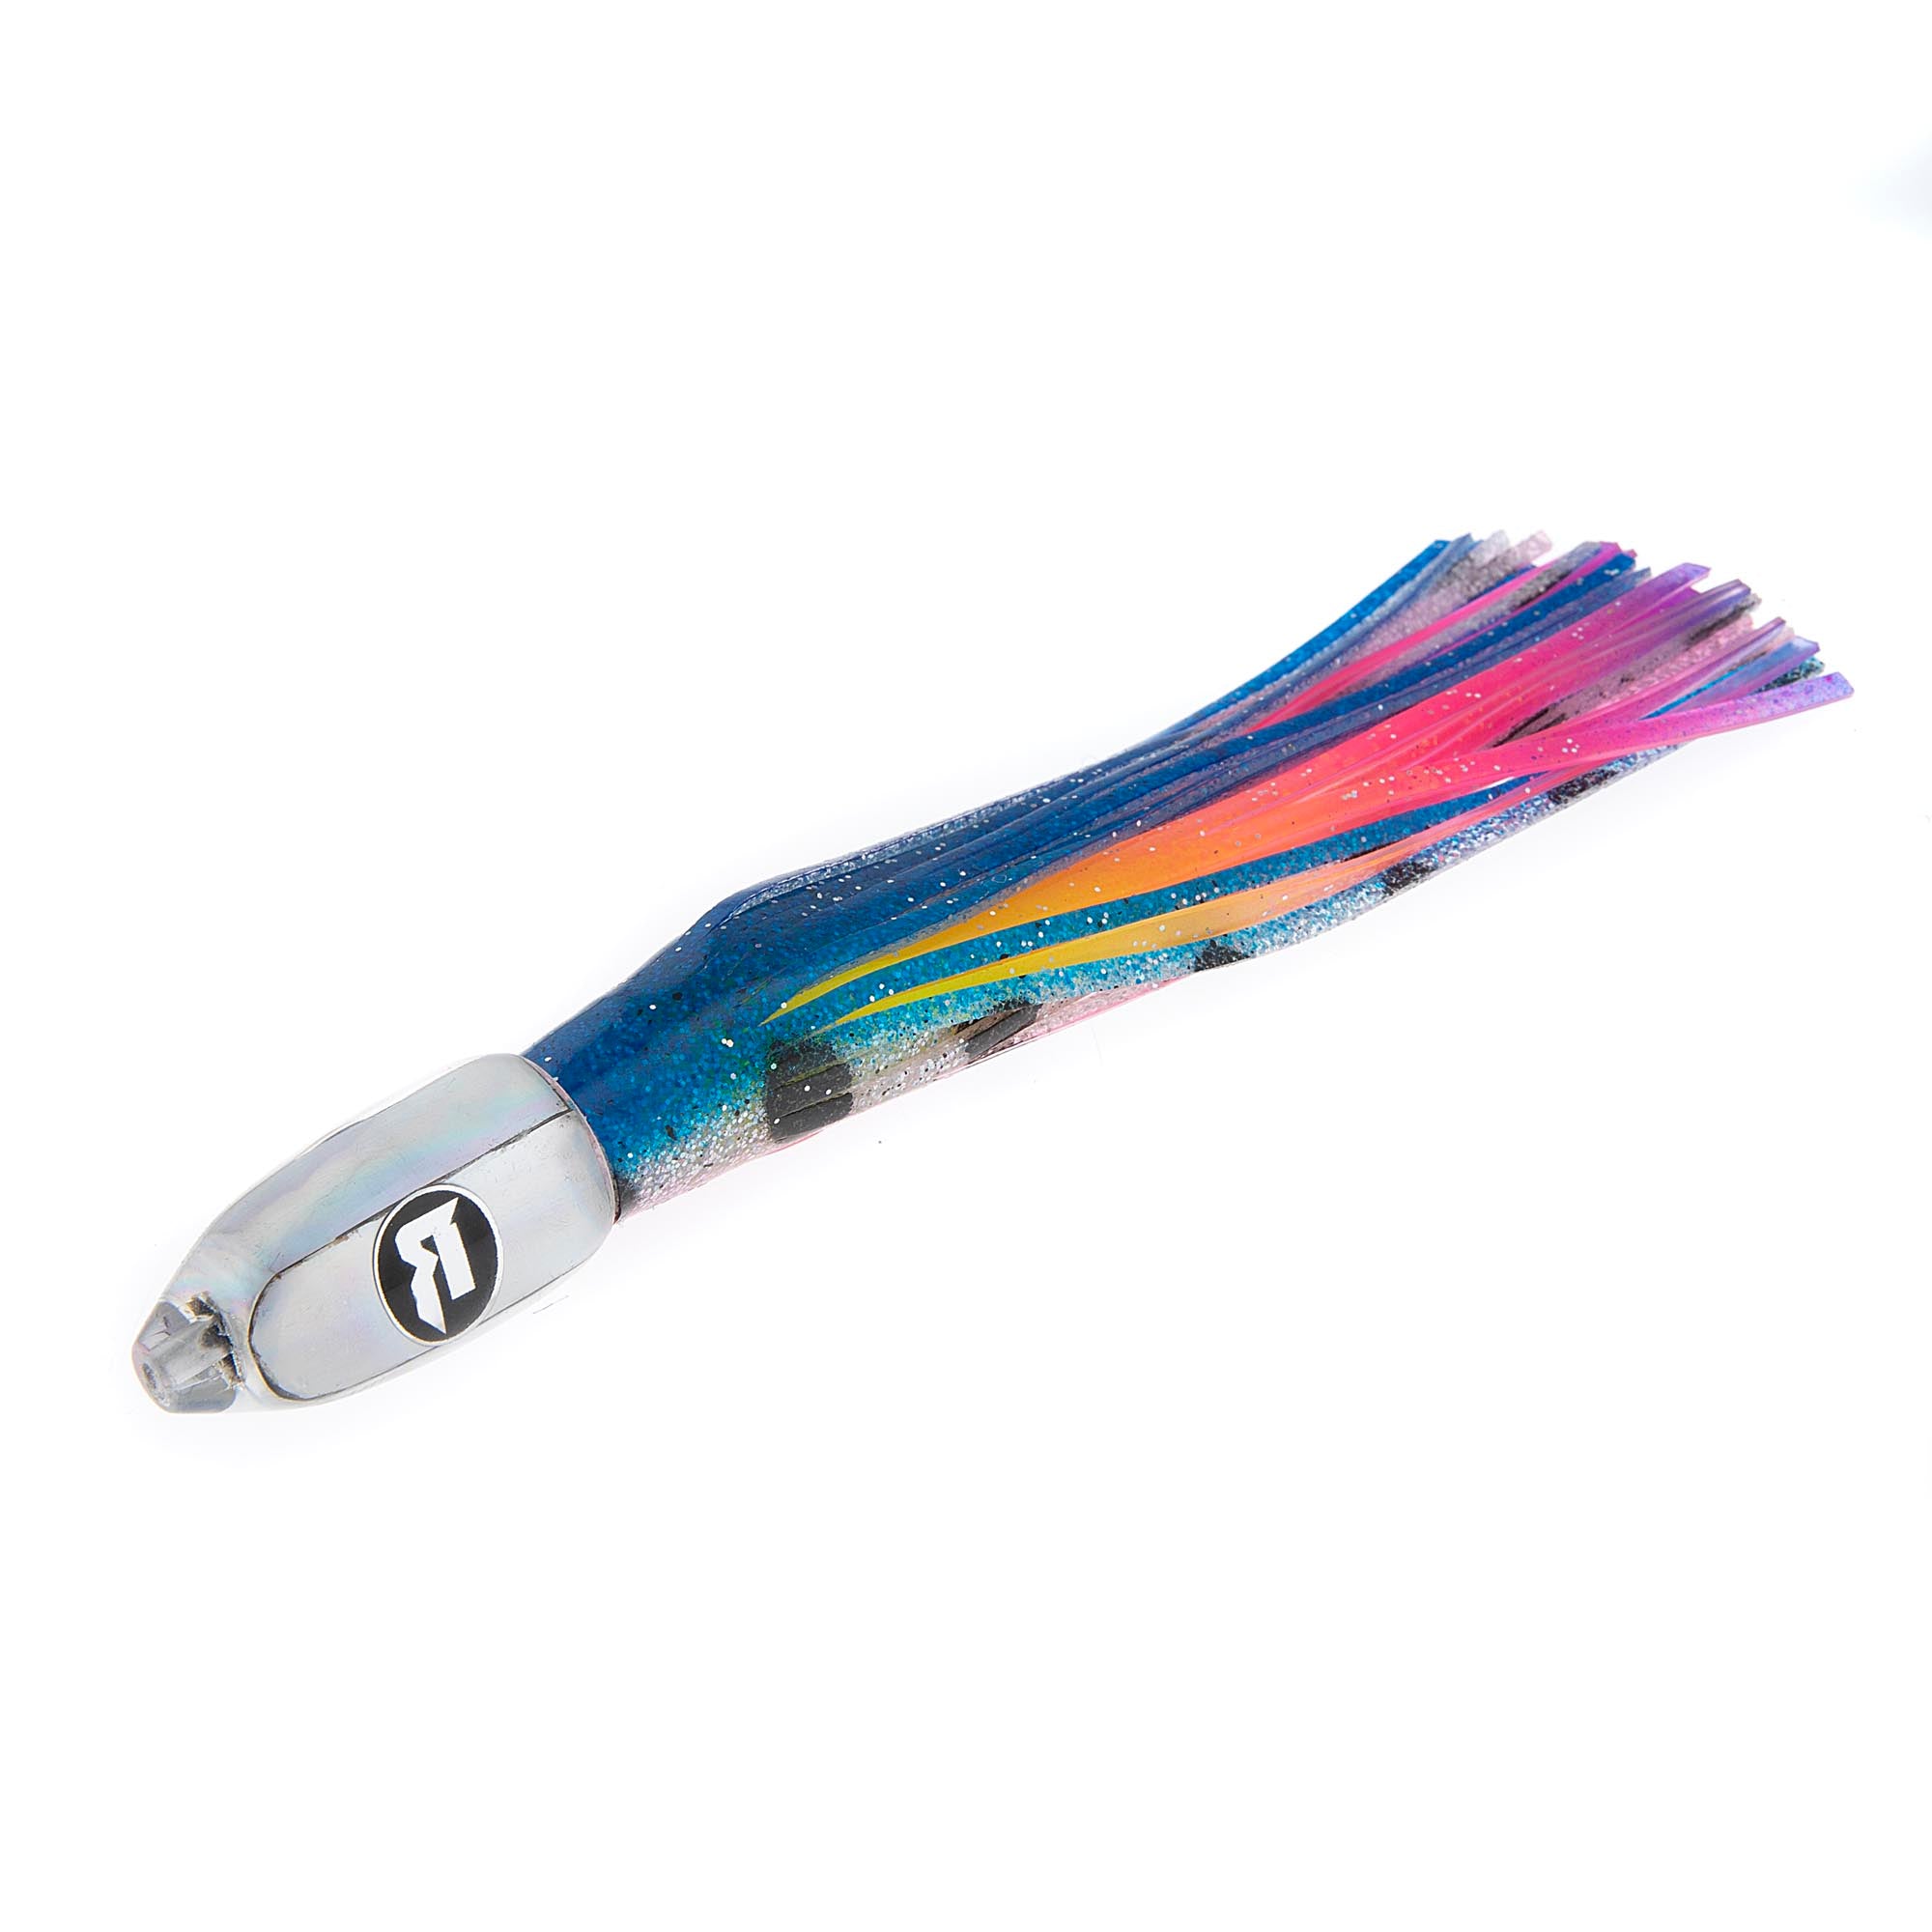 The Kyky Lure - Richter Lures